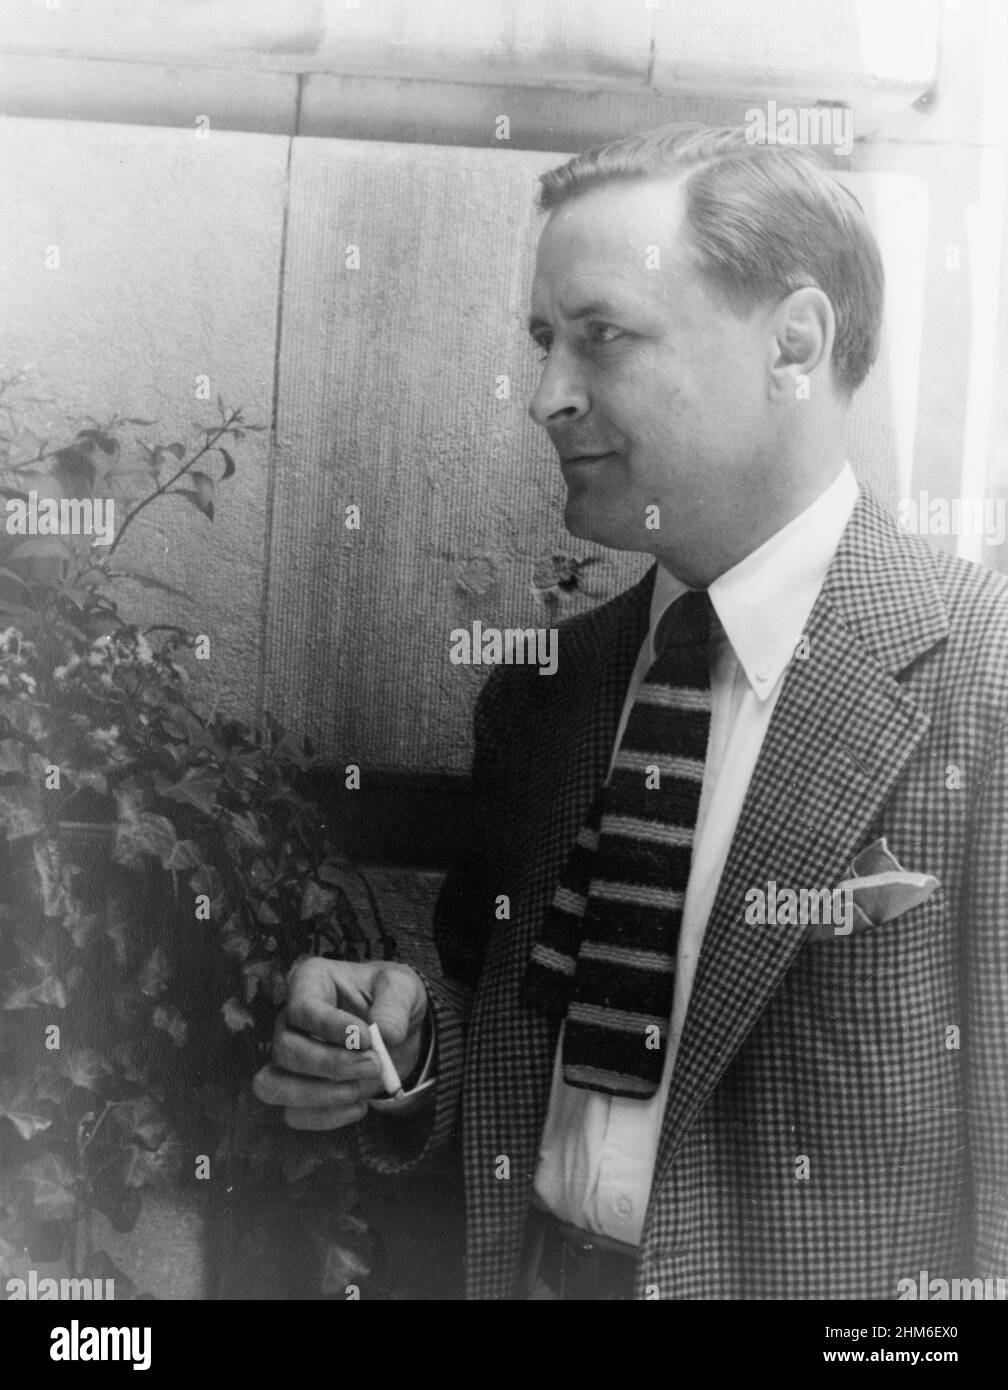 The american writer F Scott Fitzgerald, author of The Great Gatsby, in 1937 aged 41. Stock Photo